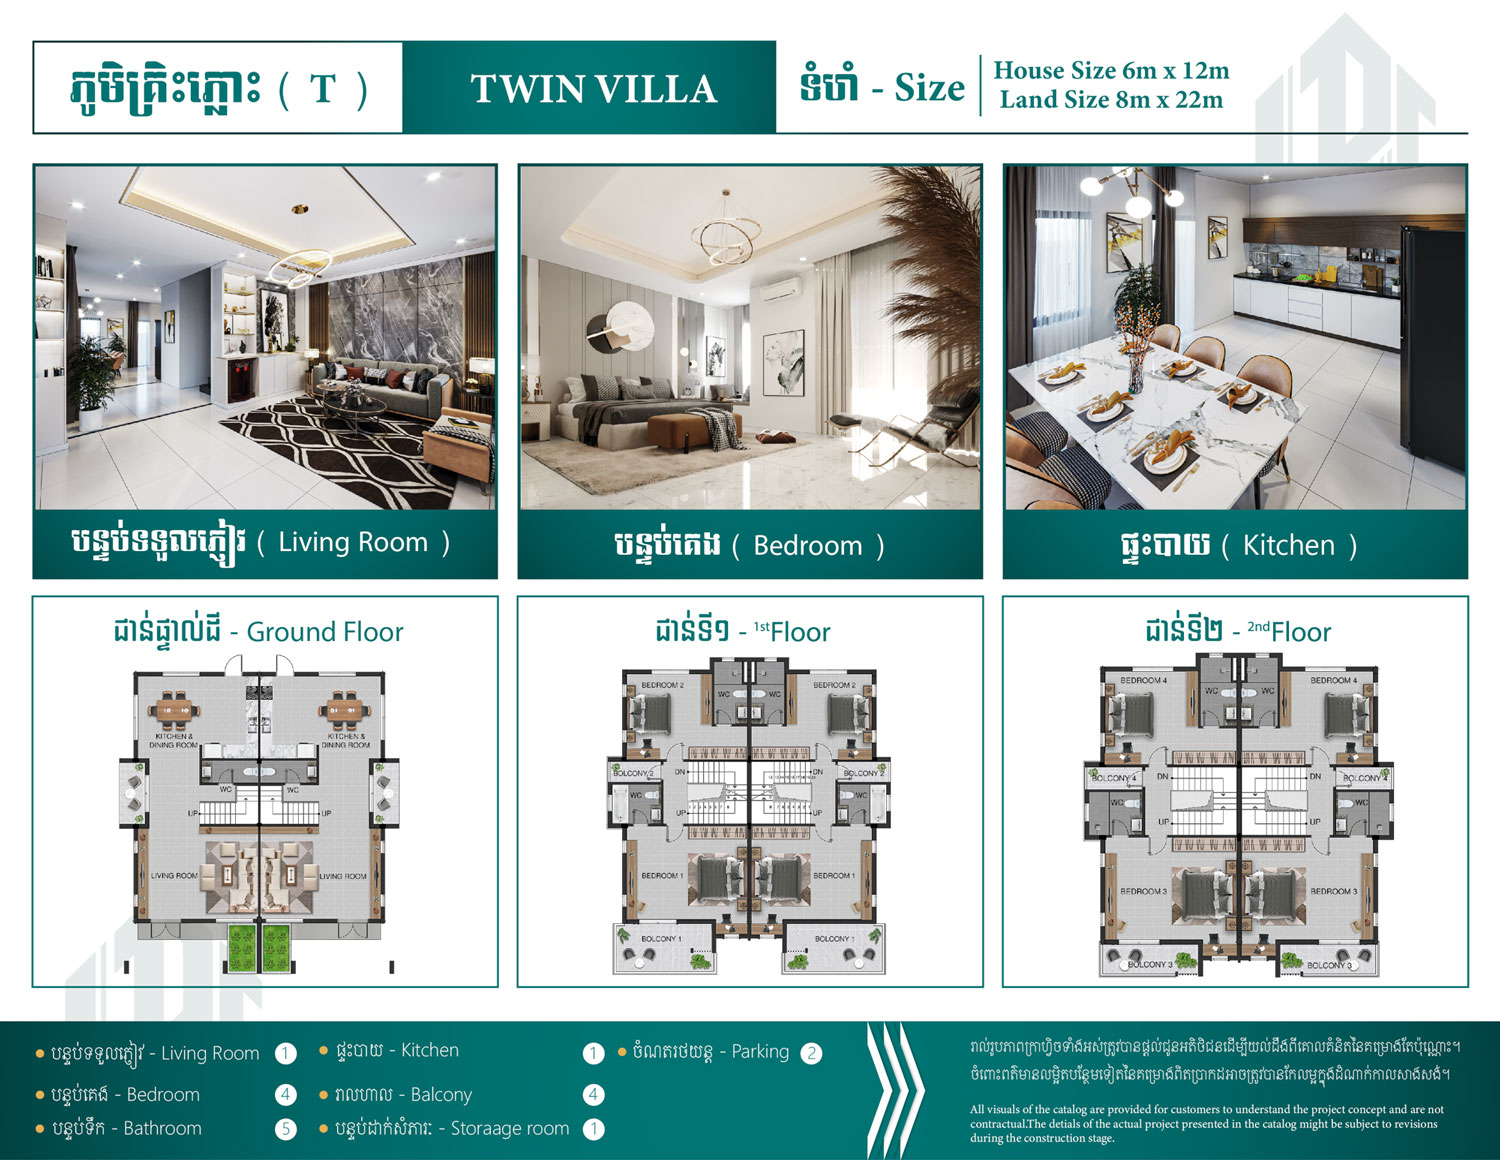 Twin Villa Overview